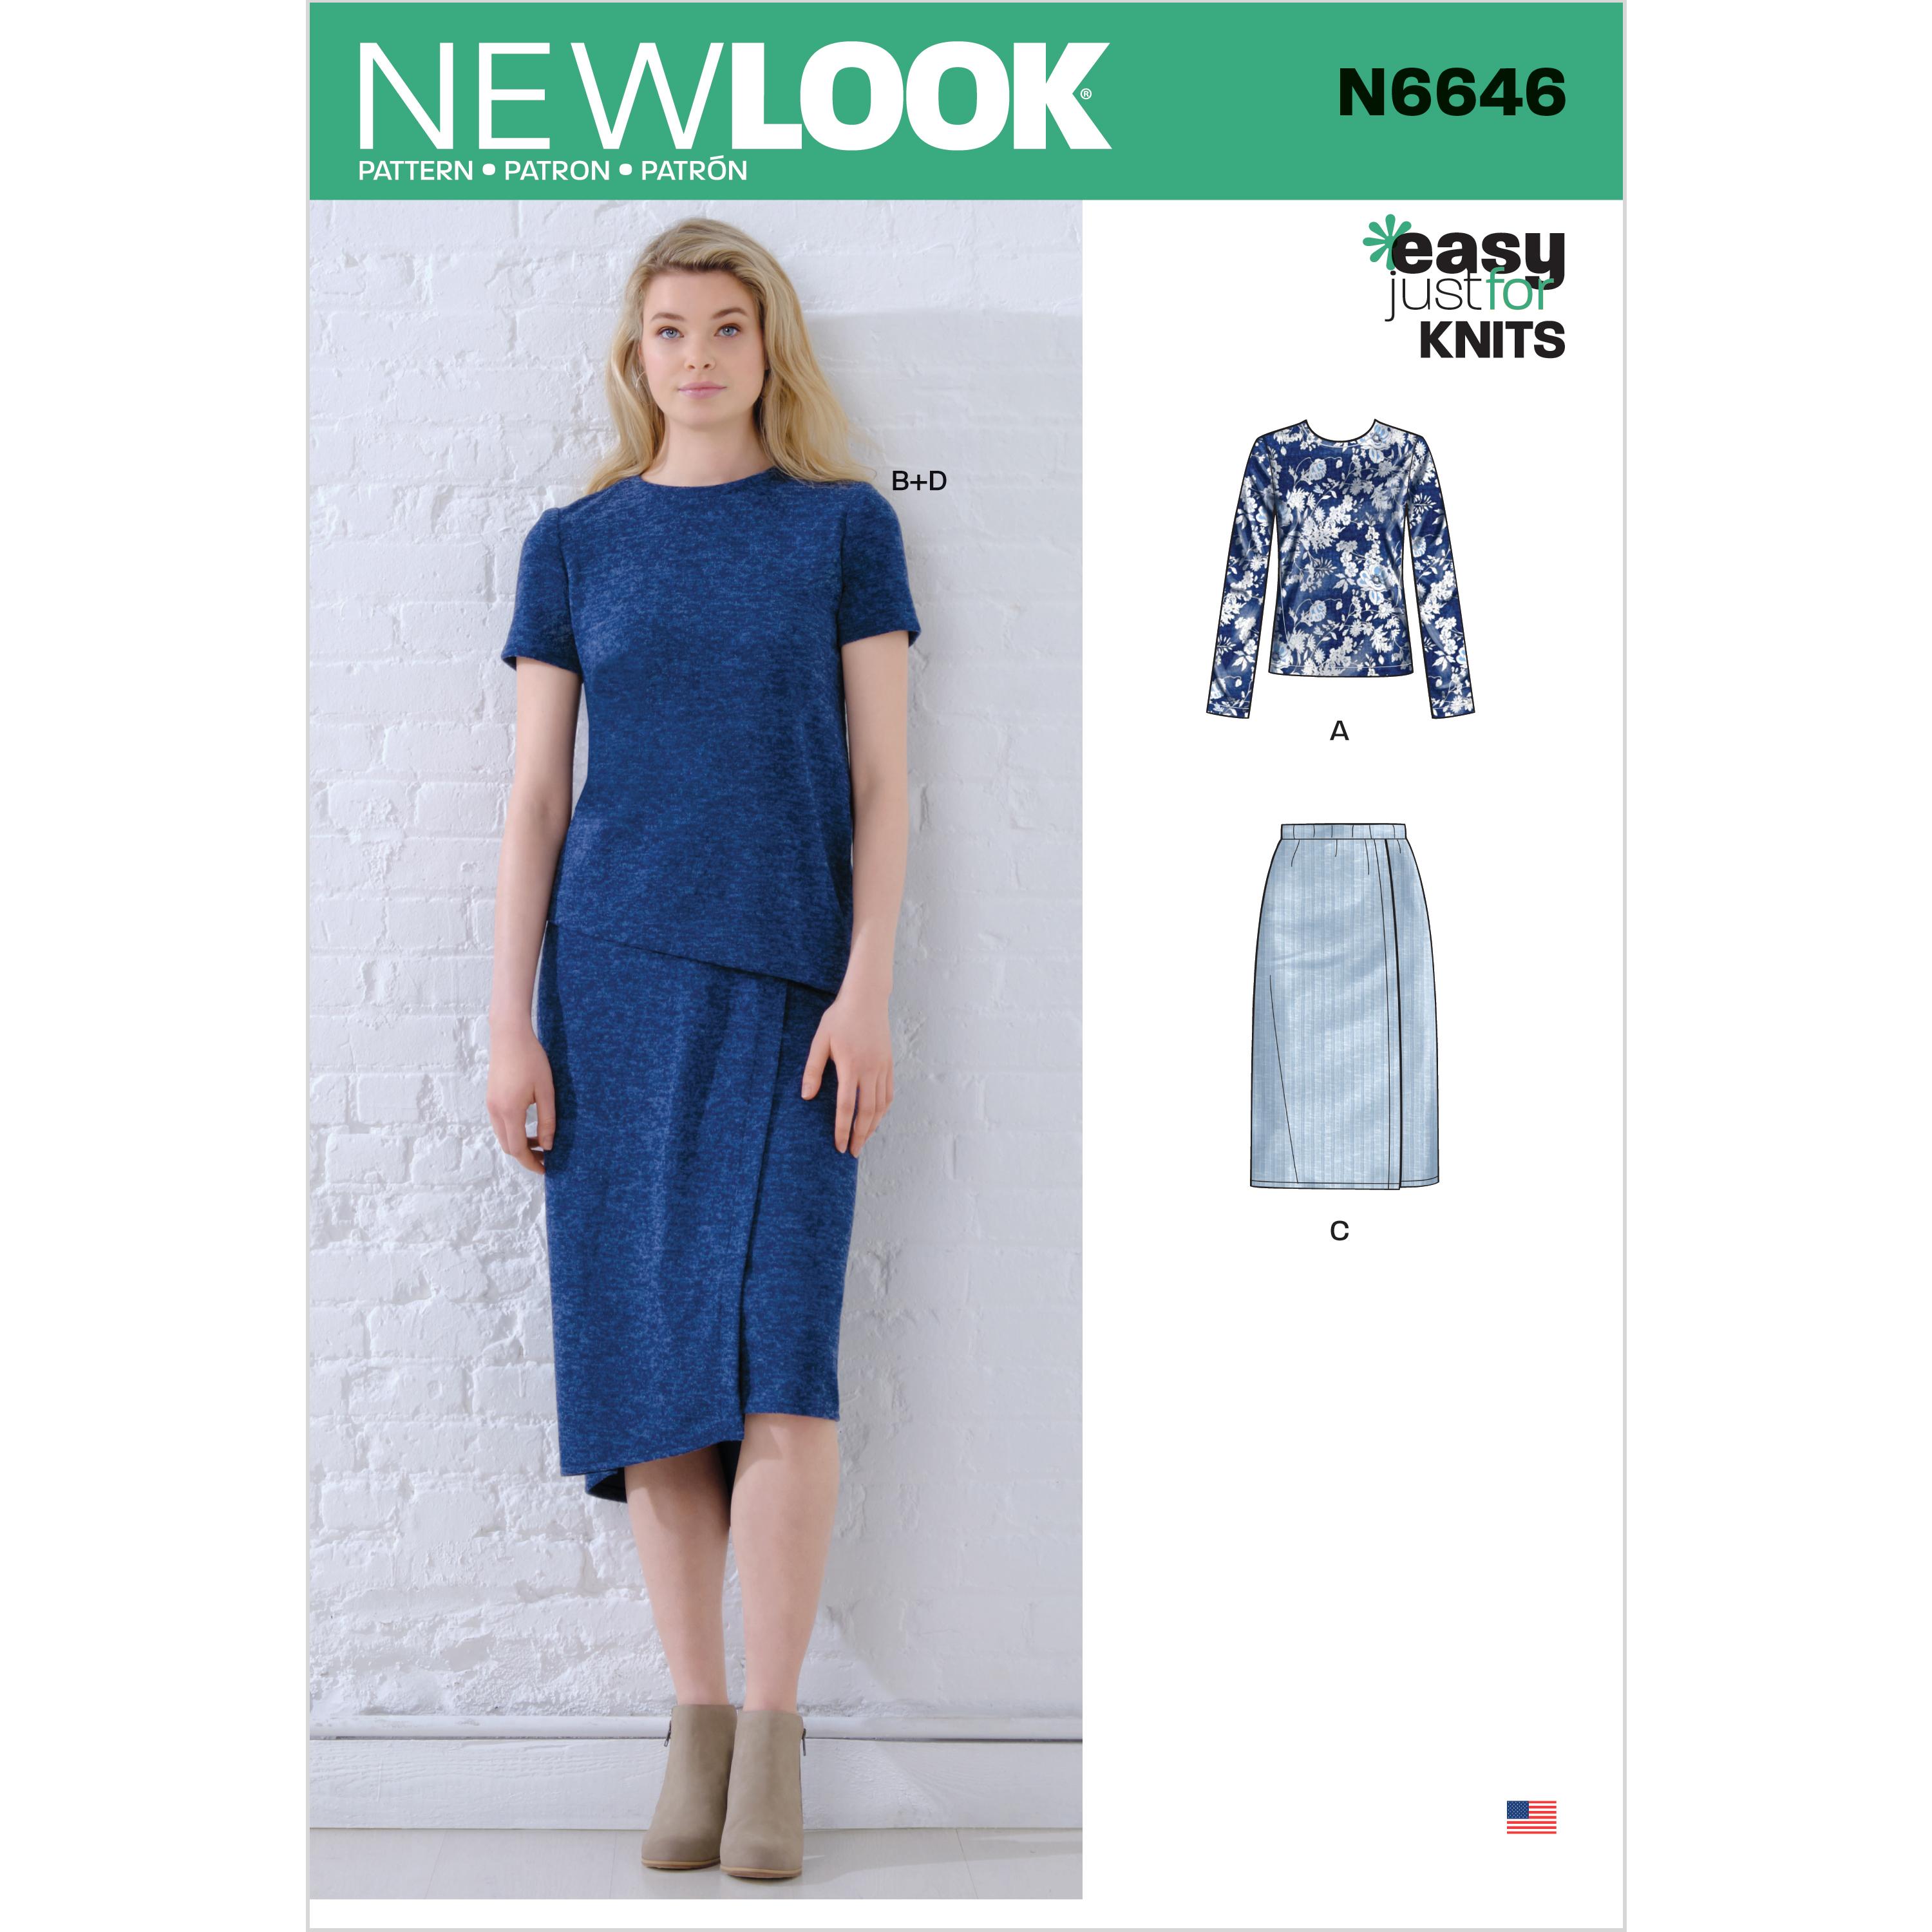 New Look Sewing Pattern N6646 Misses' Knit Tops and Skirts